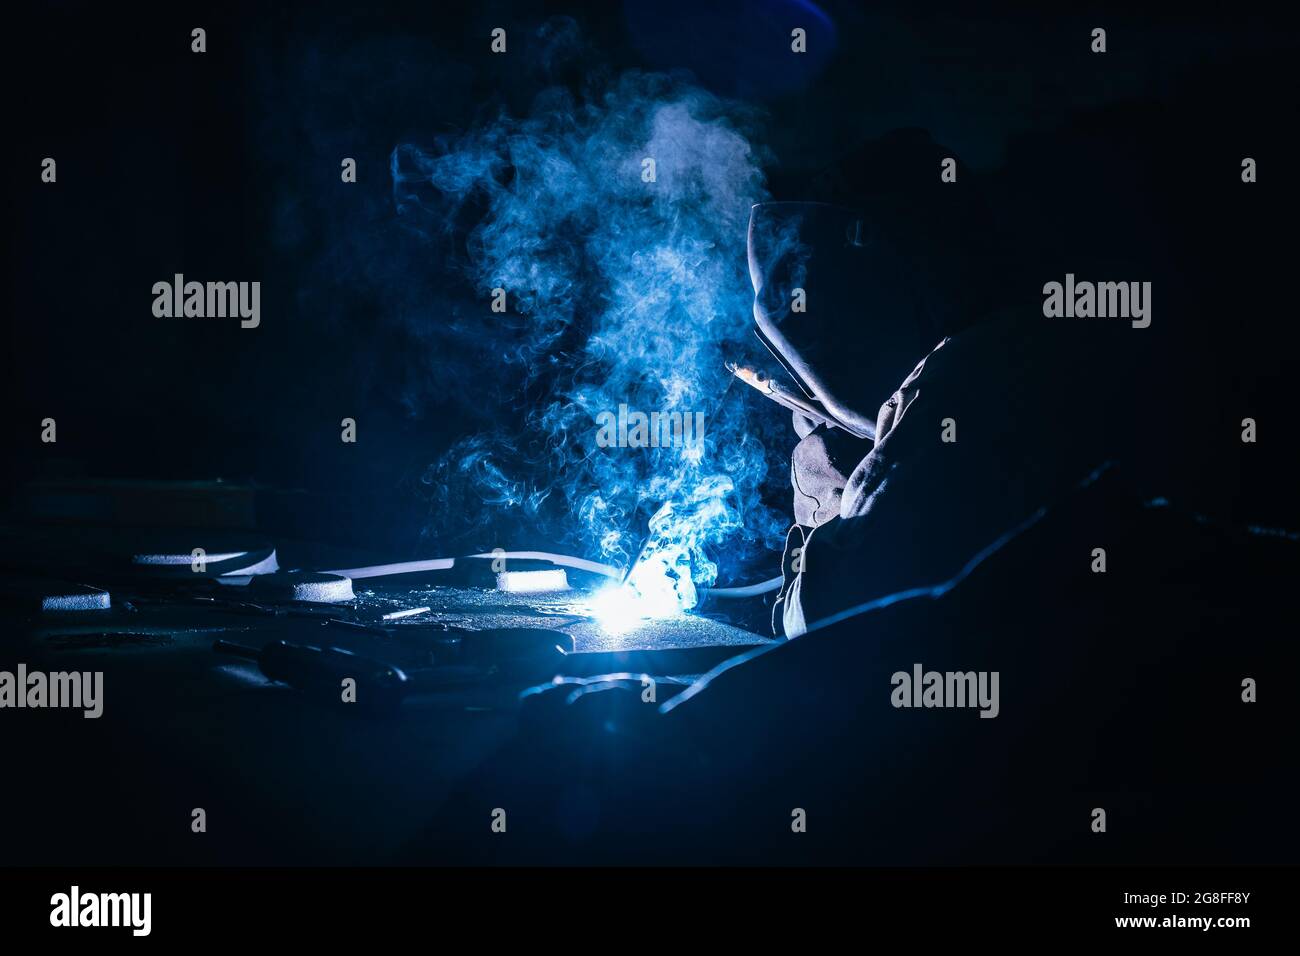 Welder at works close up. White flashes and welding smoke. Metalwork process. Stock Photo